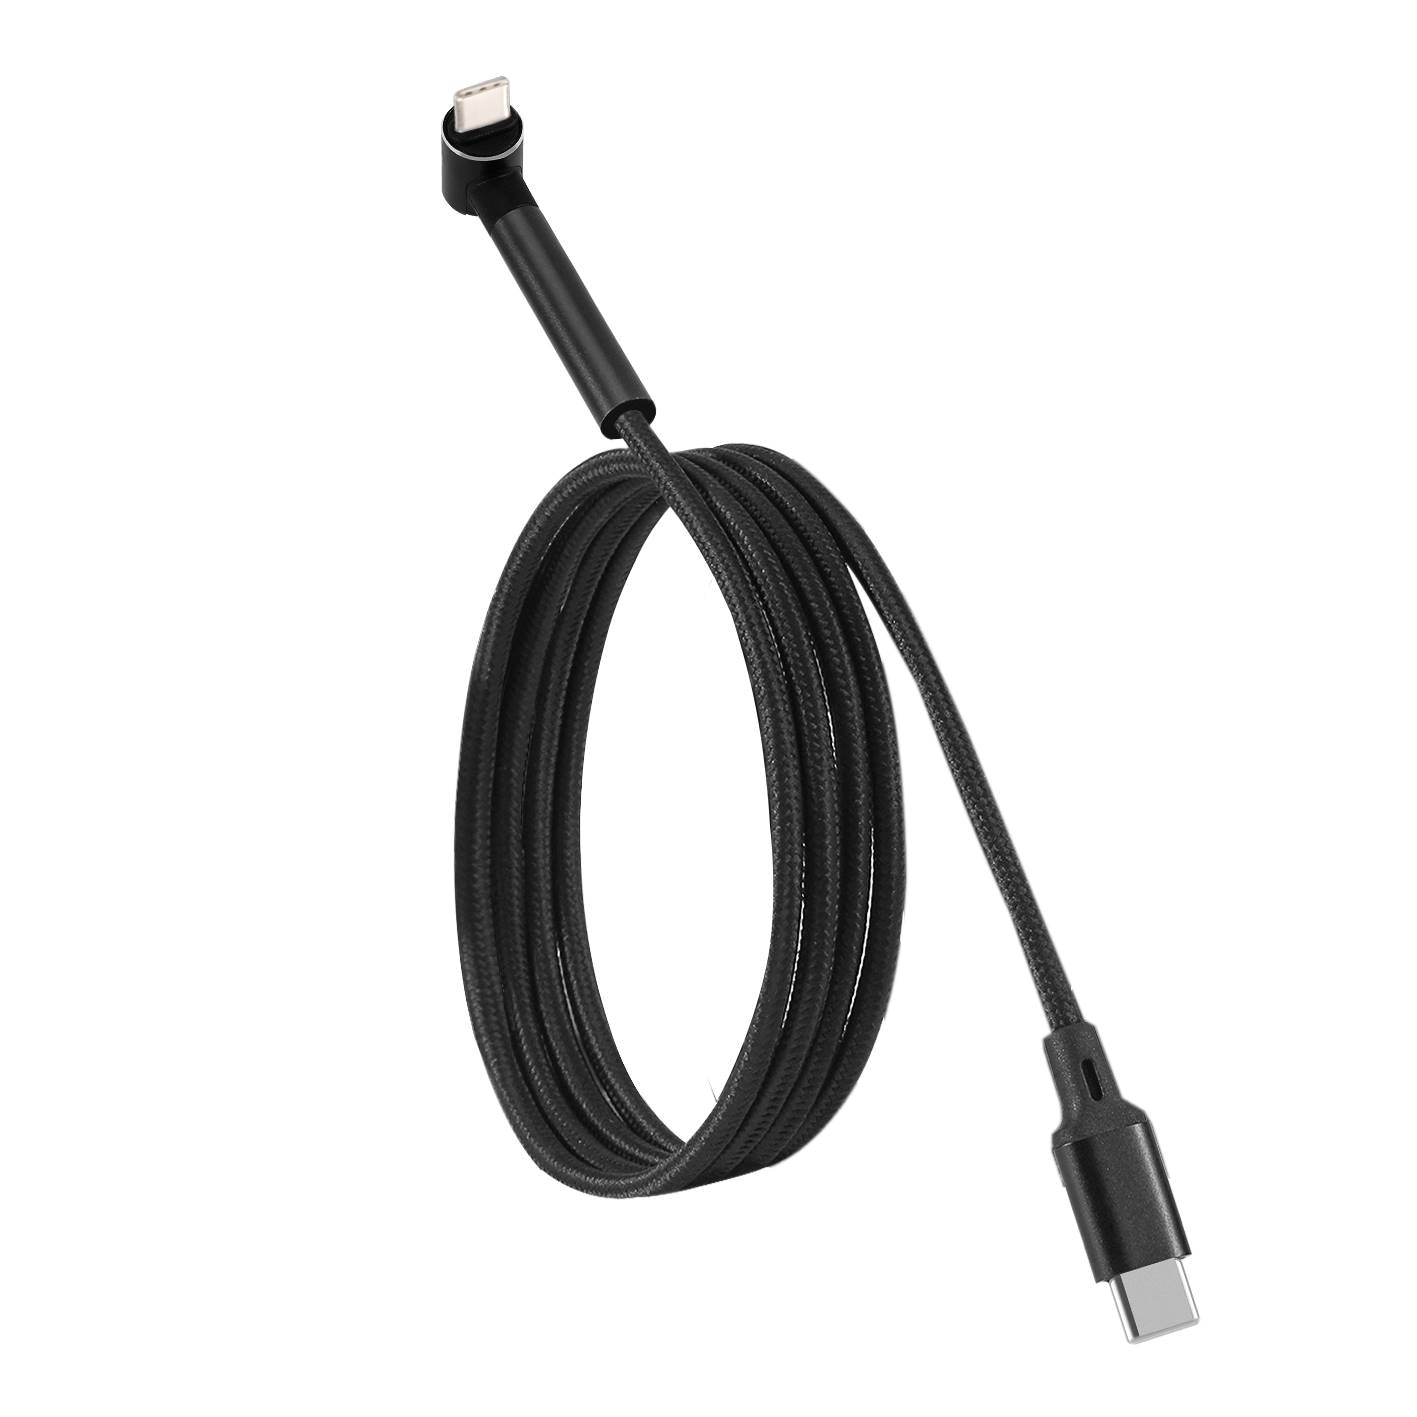 USB-C Charging Cable with a Stand - RapidX